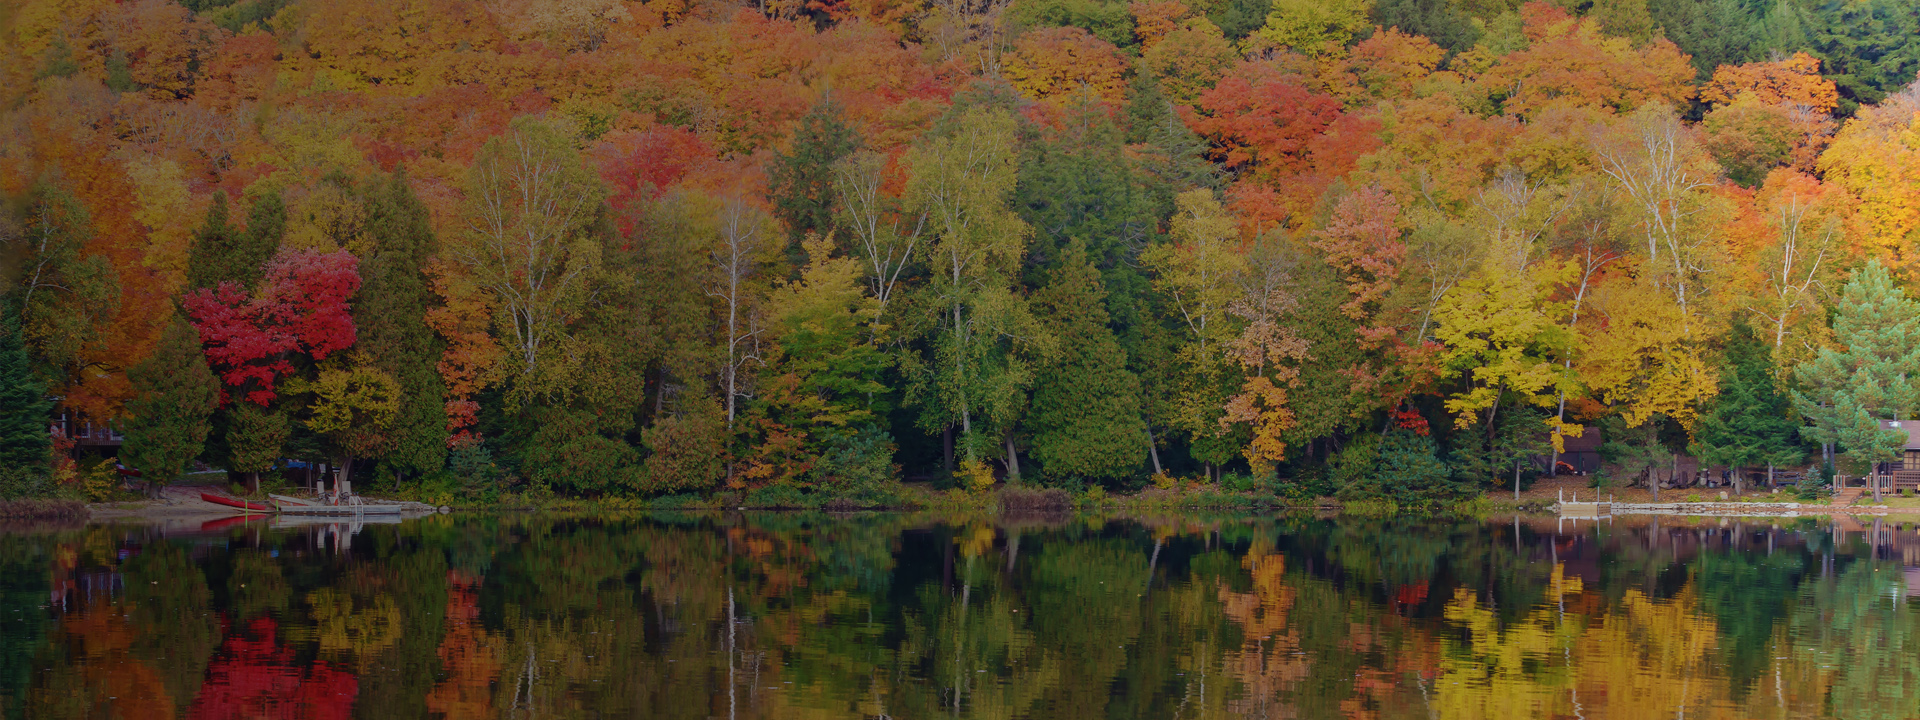 Reflection of fall foliage on a calm lake in Muskoka region, Ontario, Canada where SOSP 2019 is being held.